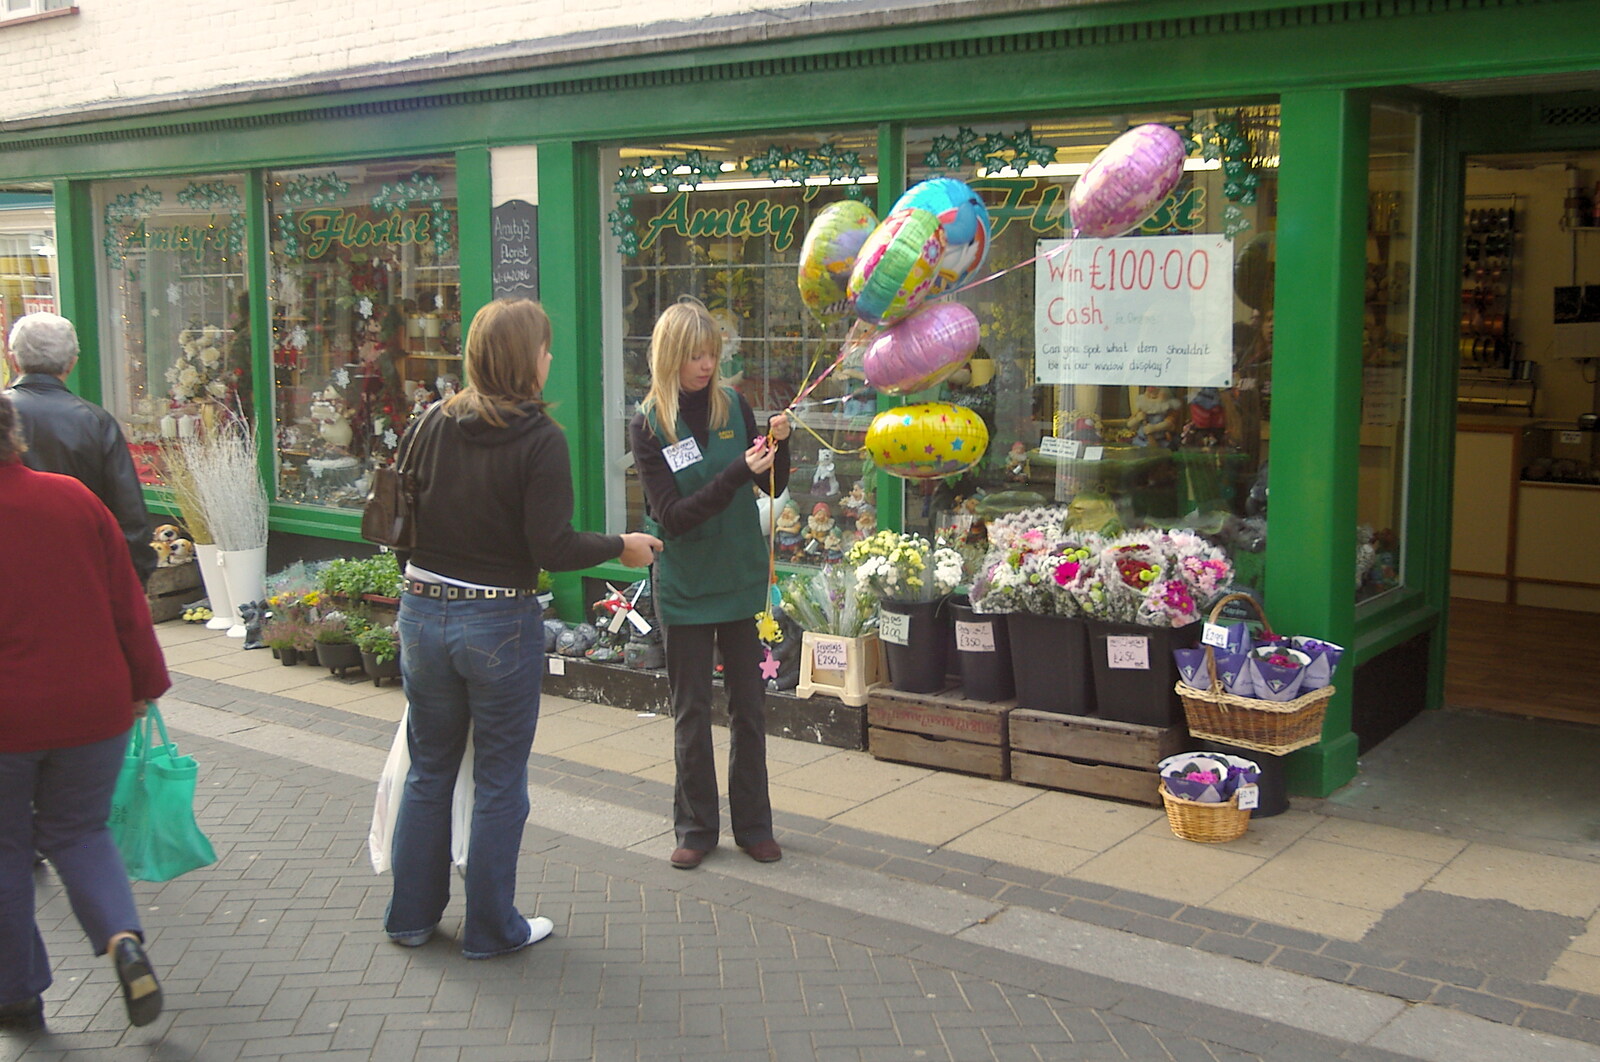 A balloon raffle outside Amity's Florist in Diss from Burnt-out Recycling Bins and Fireworks from a Distance, Diss, Norfolk - 4th November 2005